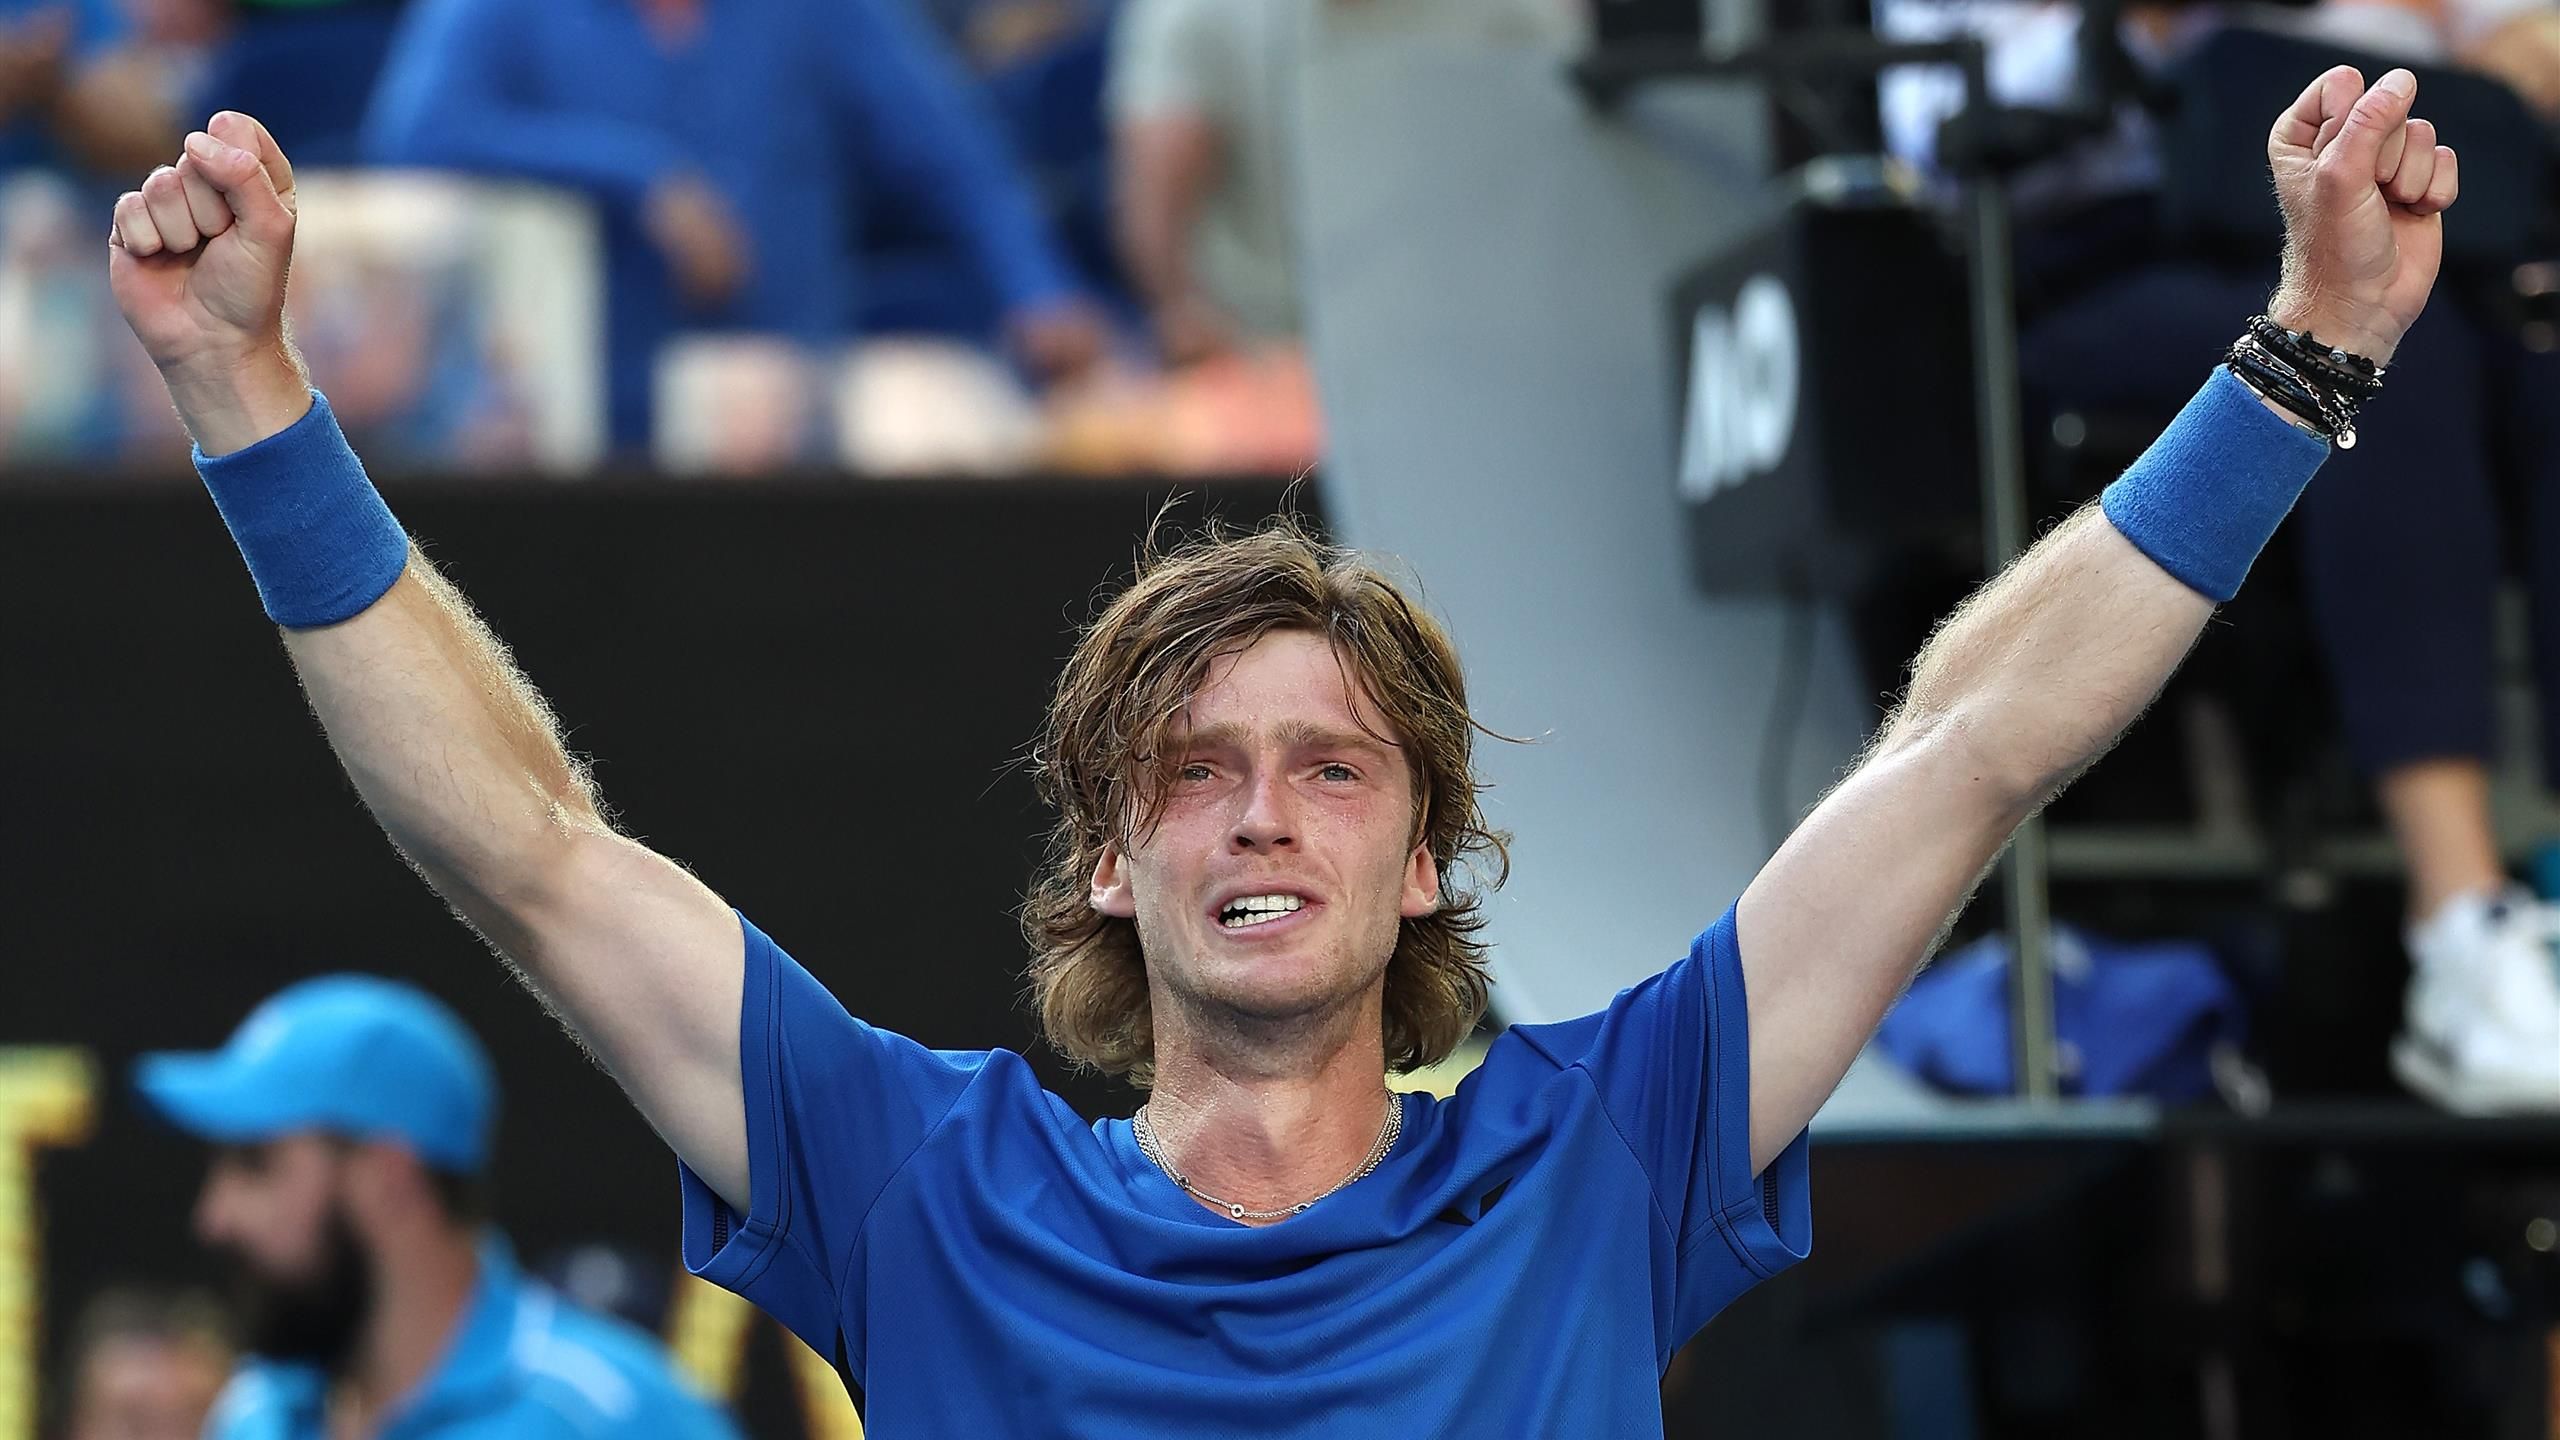 Andrey Rublev saves two match points before beating Holger Rune in five-set thriller to reach Australian Open quarters